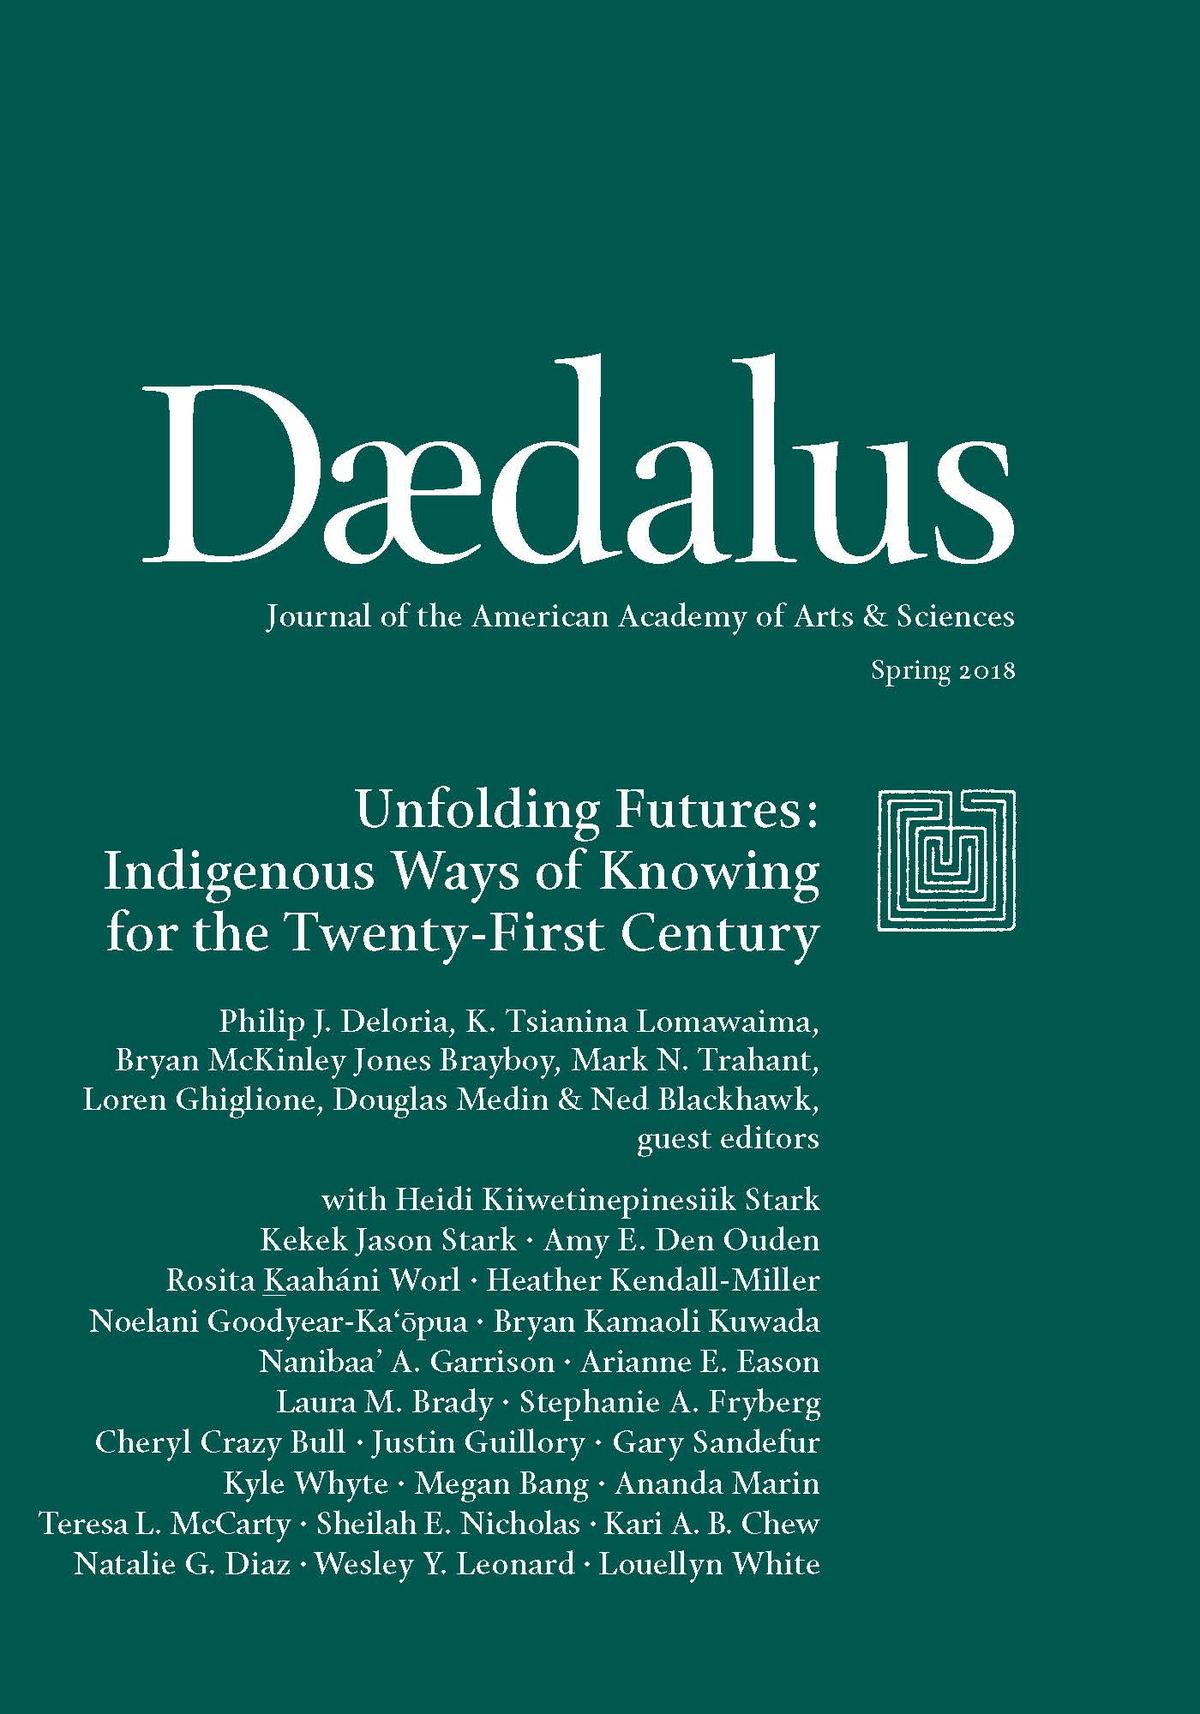 Cover of Daedalus, Spring 2018. "Unfolding Futures: Indigenous Ways of Knowing for the Twenty-First Century."